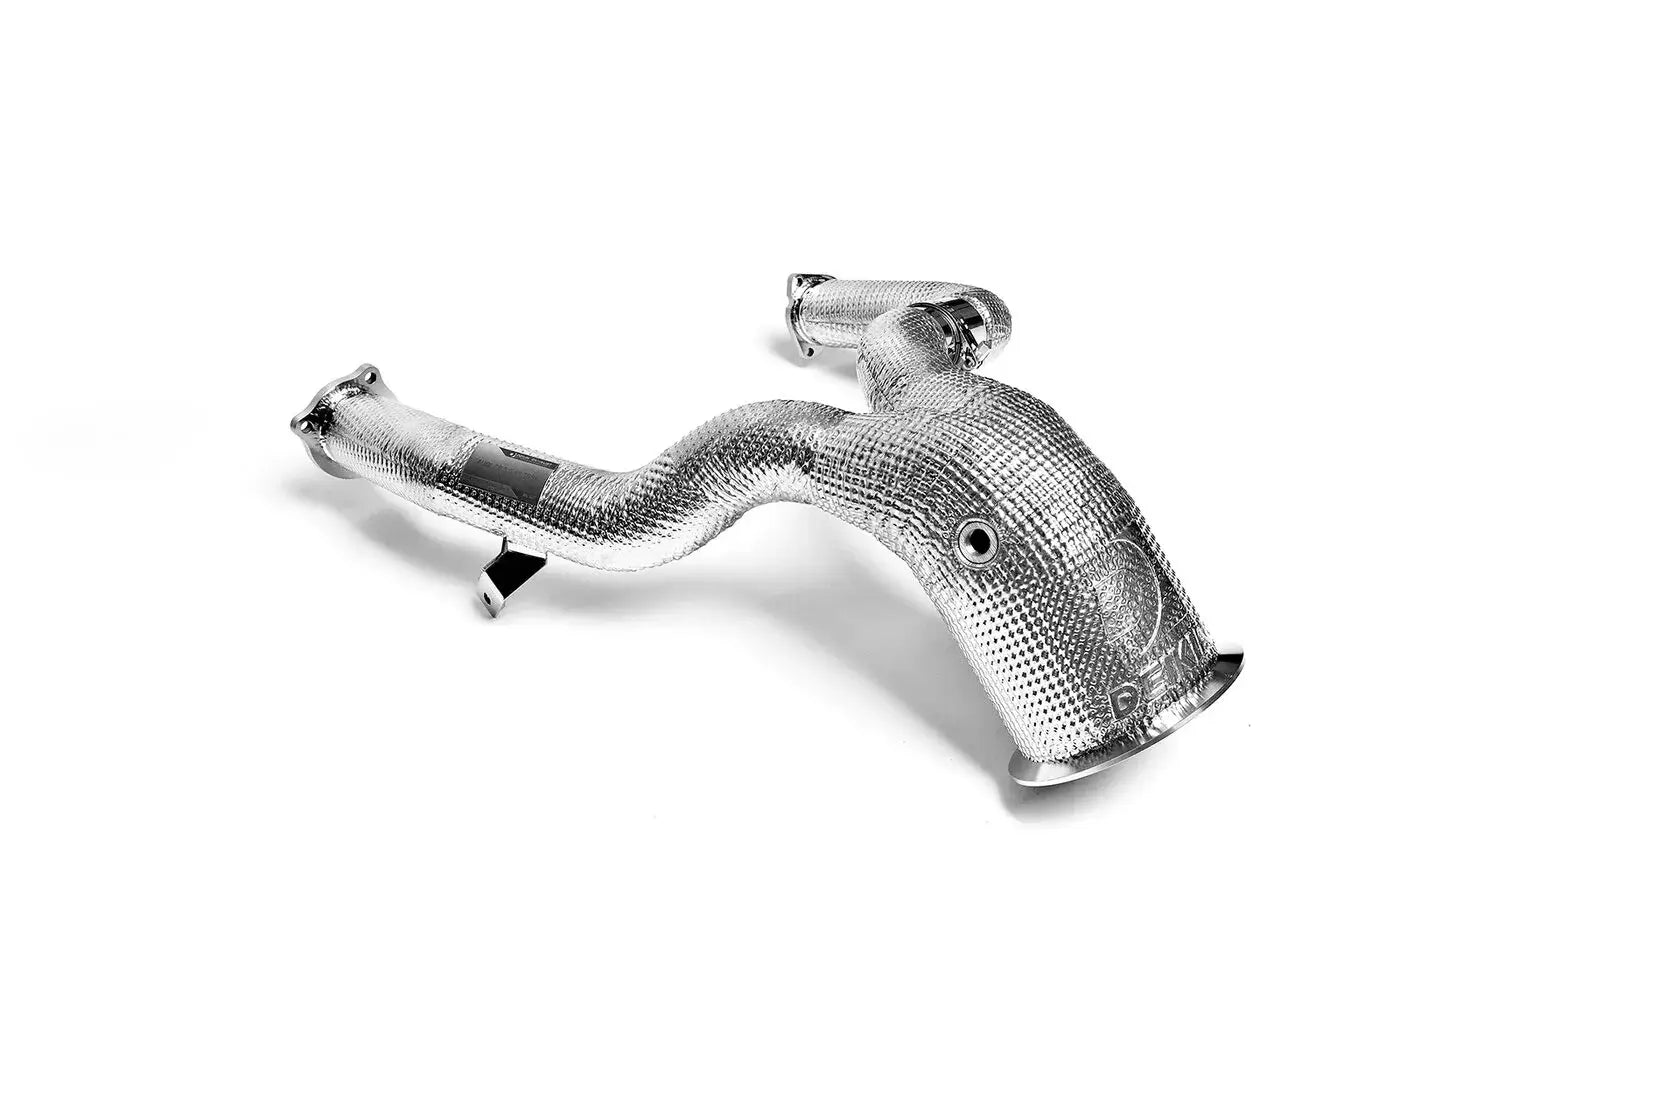 DEIKIN 10-AUDI.A6.C8-DPT Downpipe for AUDI A6 (C8) 55 TFSI with thermal insulation HeatShield Photo-0 